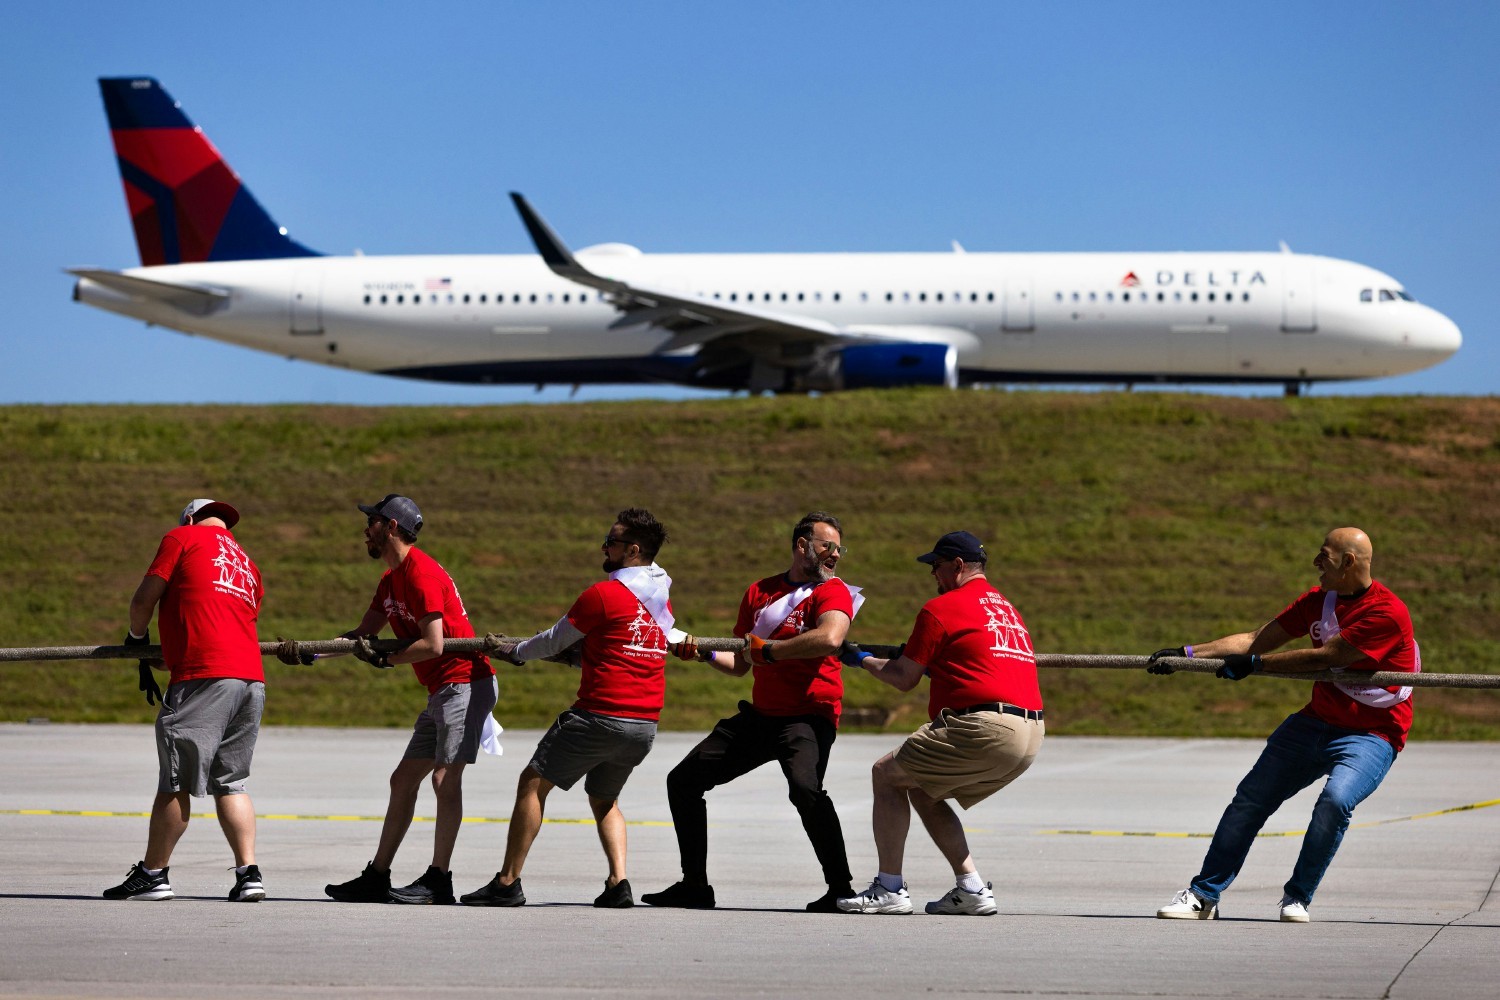 Employees at Jet Drag, a giant tug-of-war with a jet, to raise awareness and funds for the American Cancer Society.